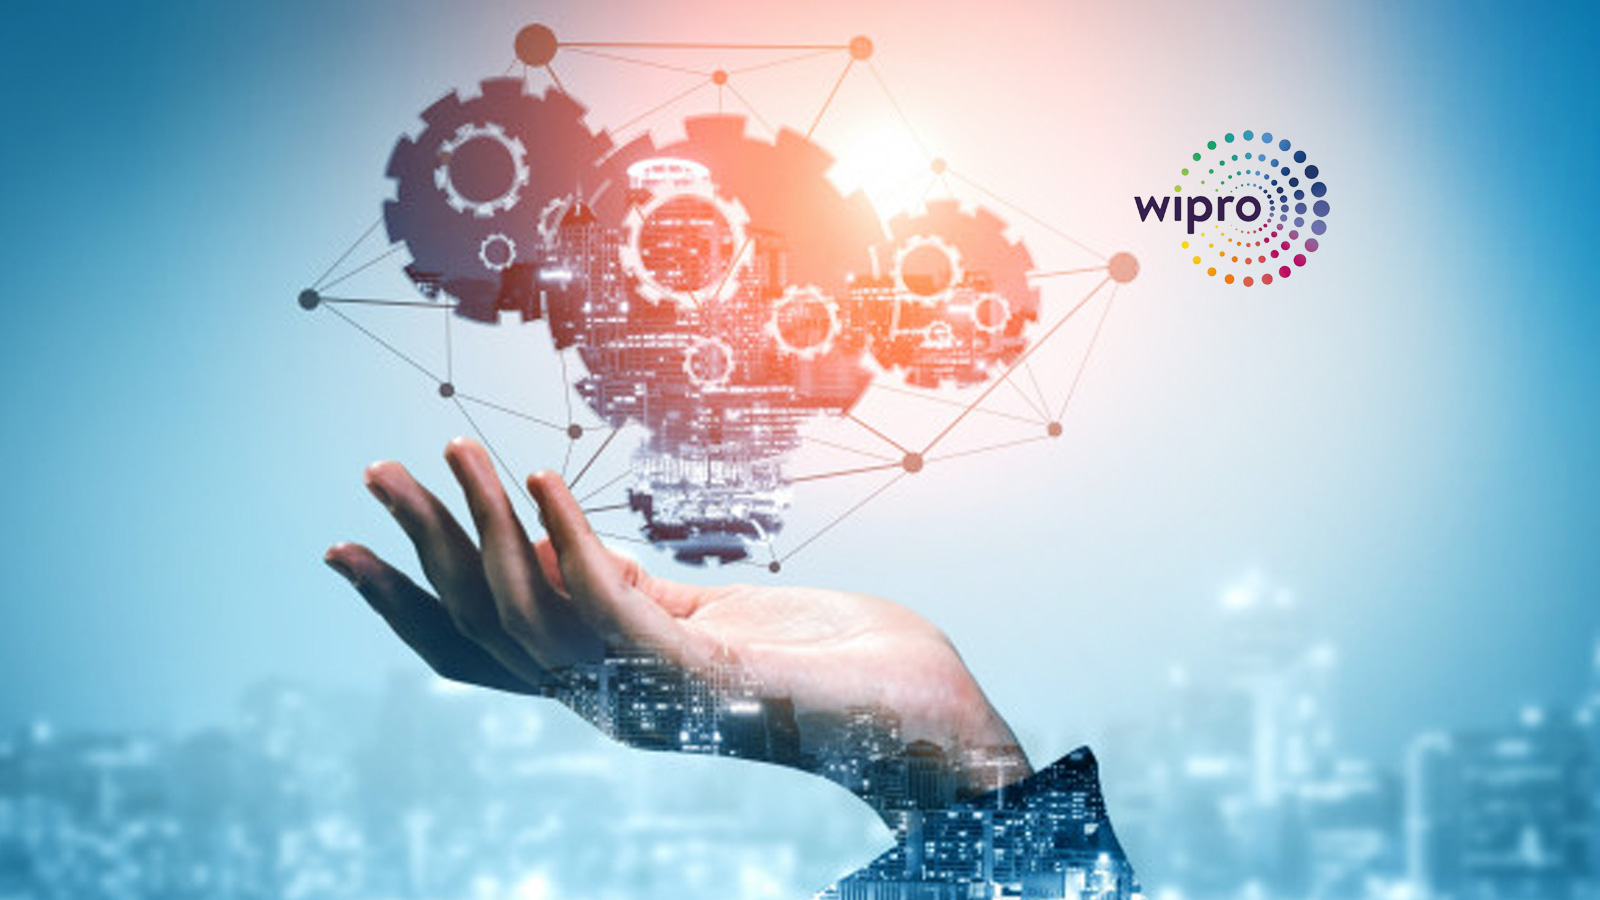 Wipro Launches Next Generation Engineering and Innovation Center